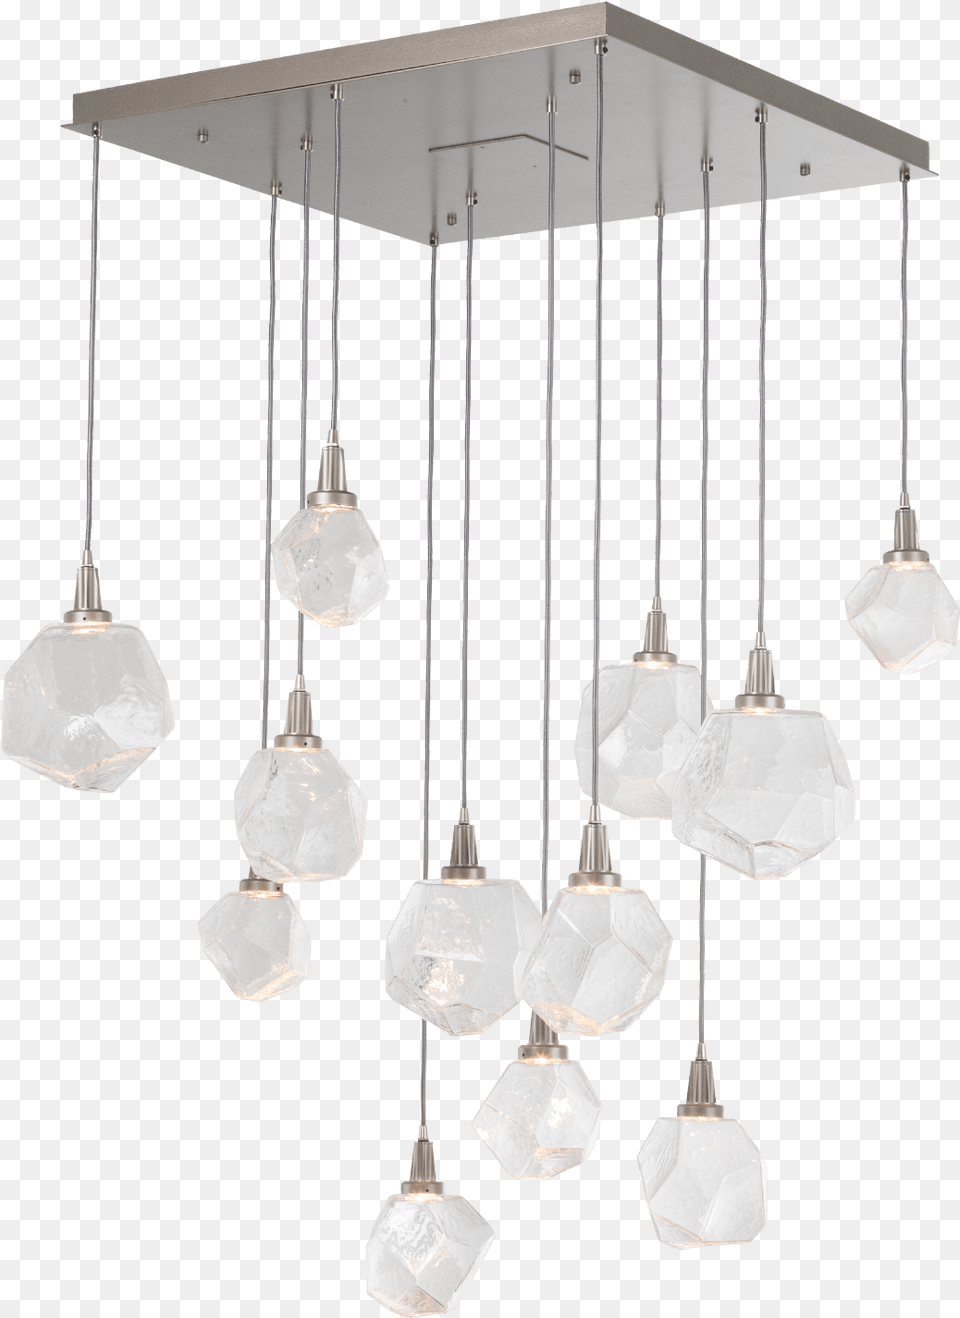 Ceiling, Chandelier, Lamp Png